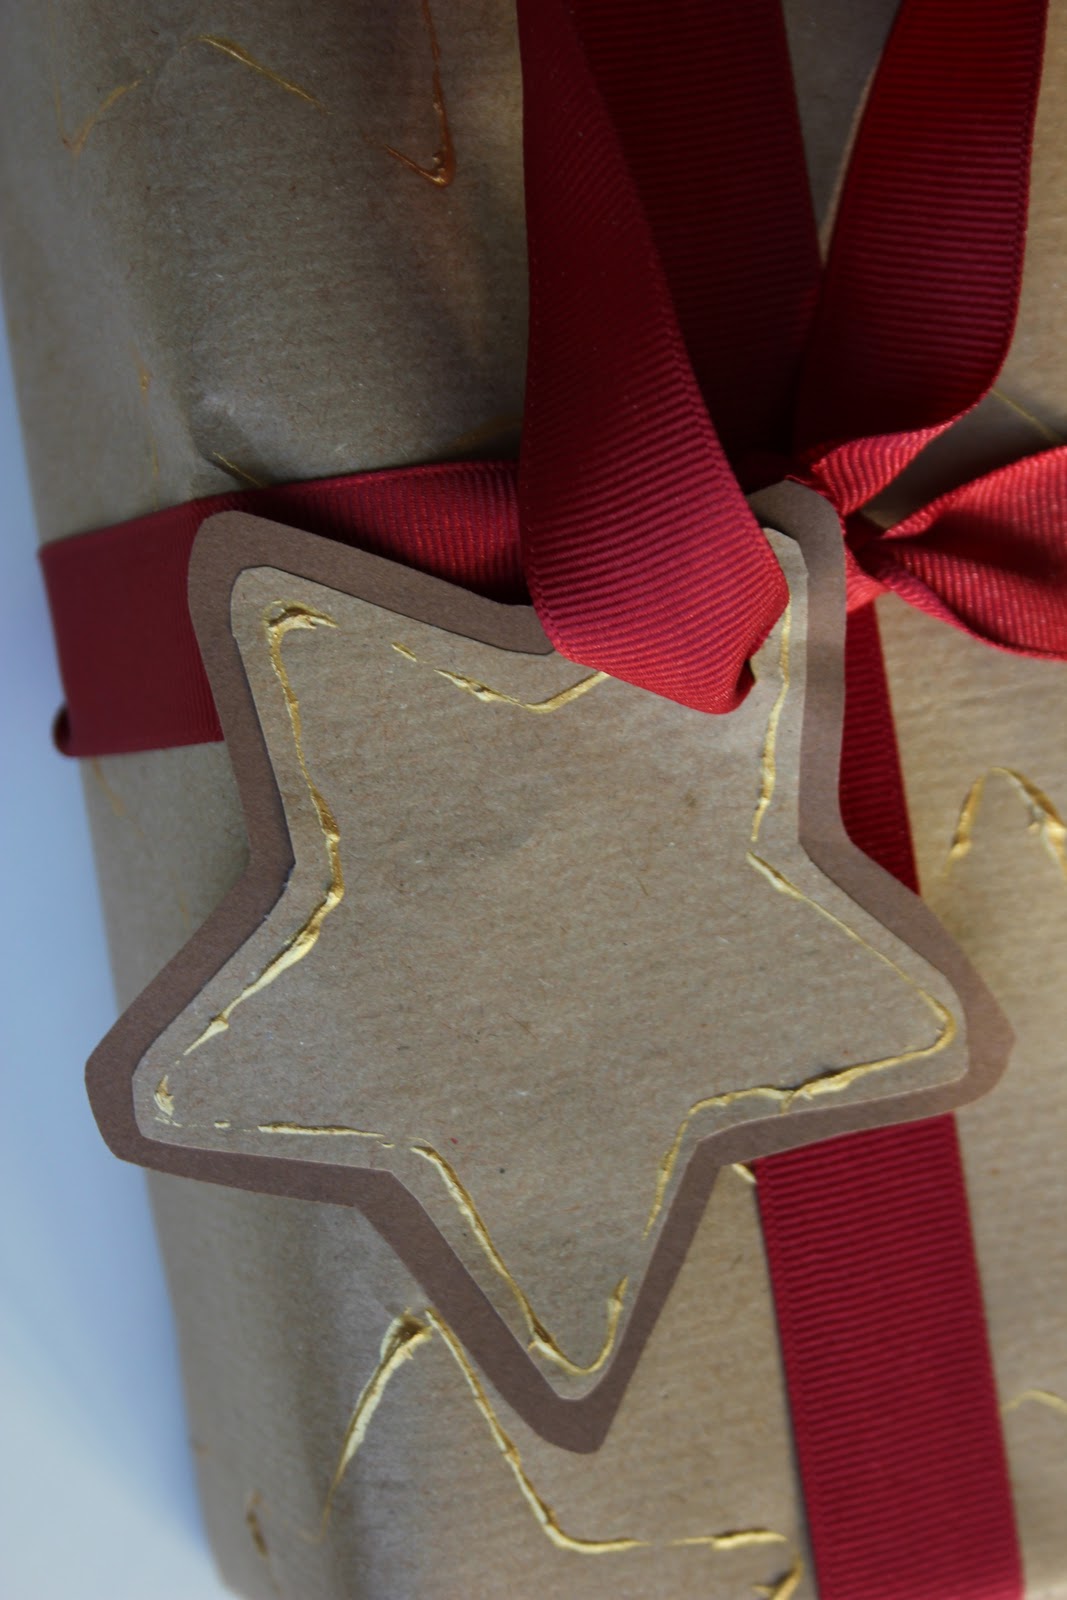 Christmas kraft paper gift tags with string solve problem of how